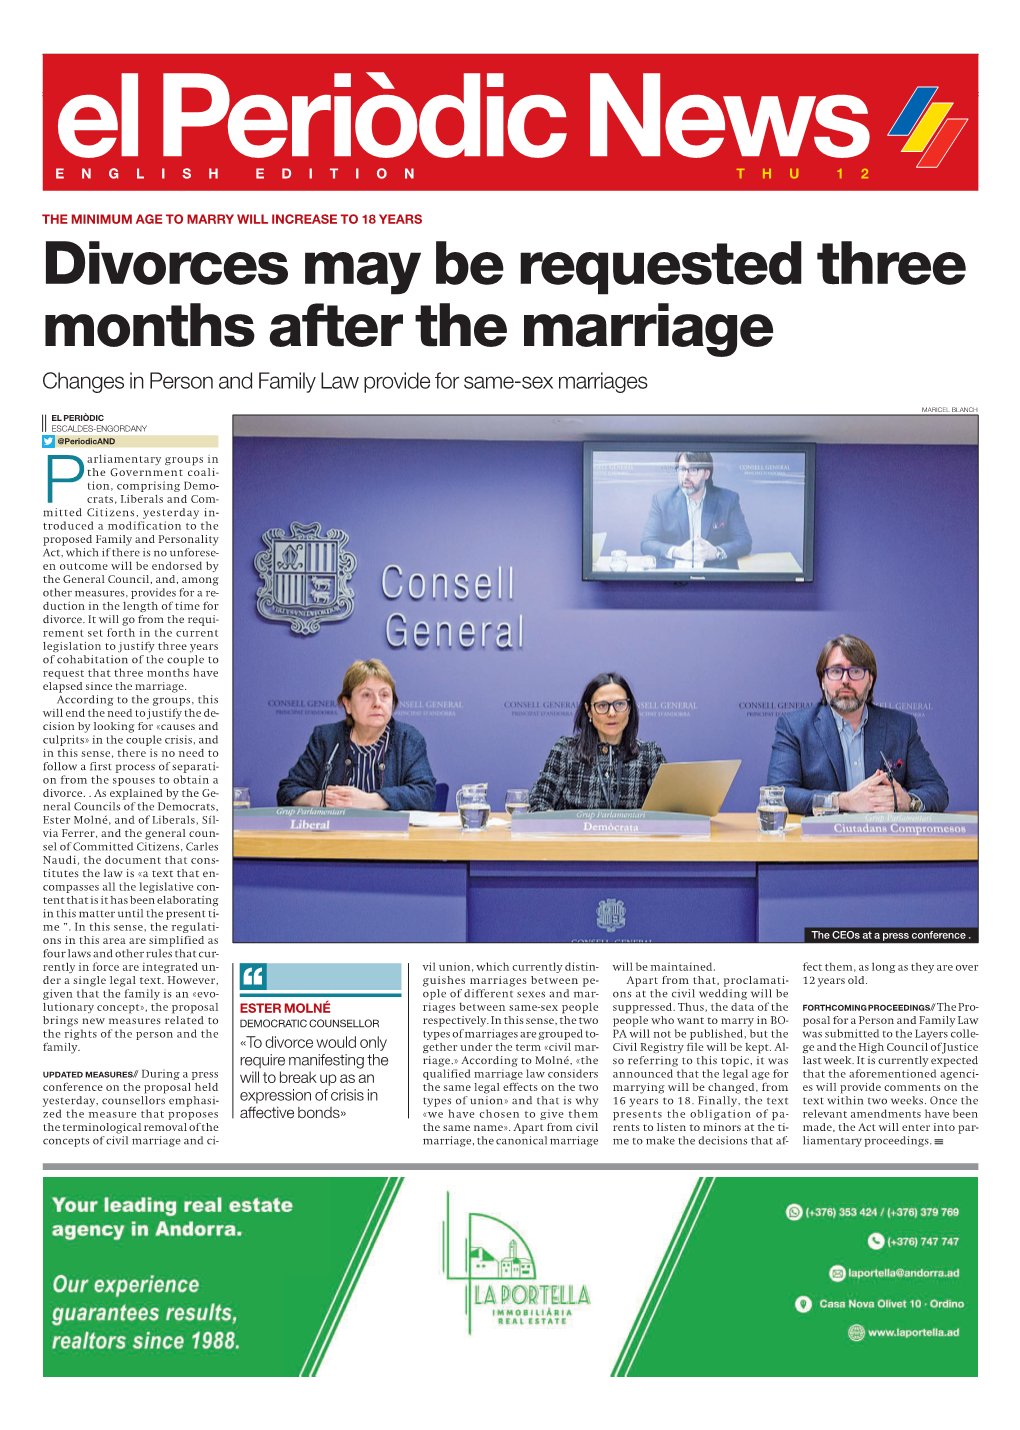 Divorces May Be Requested Three Months After the Marriage Changes in Person and Family Law Provide for Same-Sex Marriages